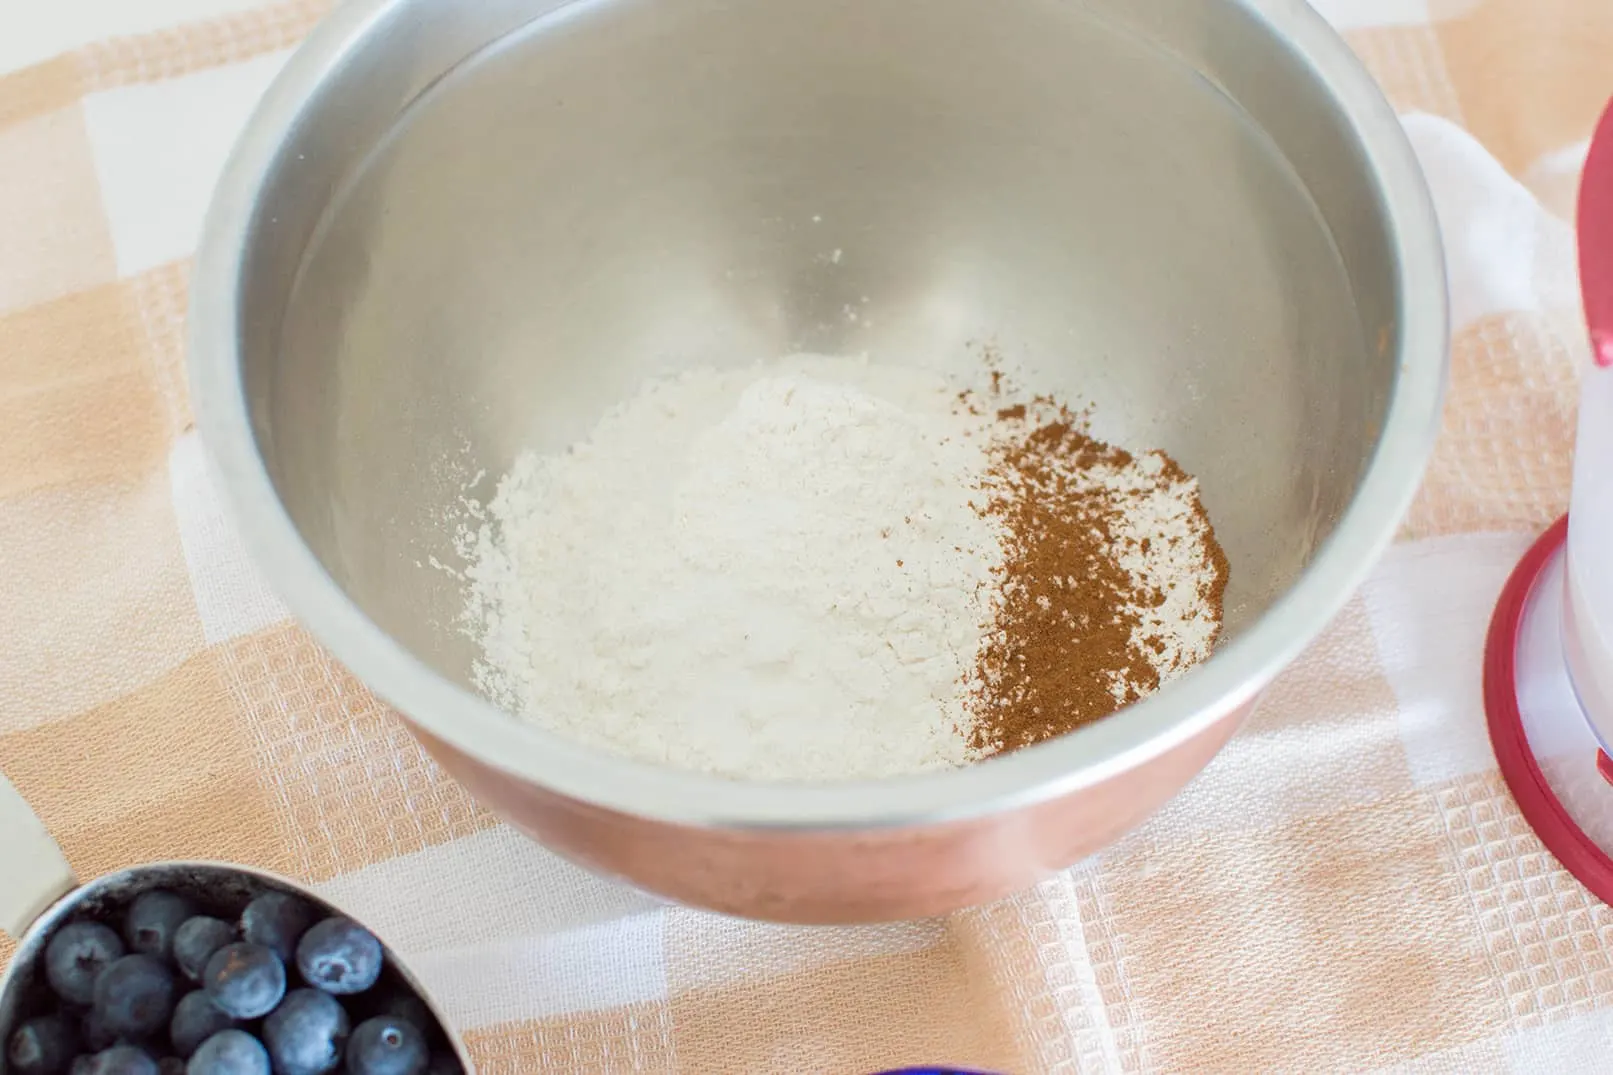 Ingredients needed for homemade blueberry pancakes